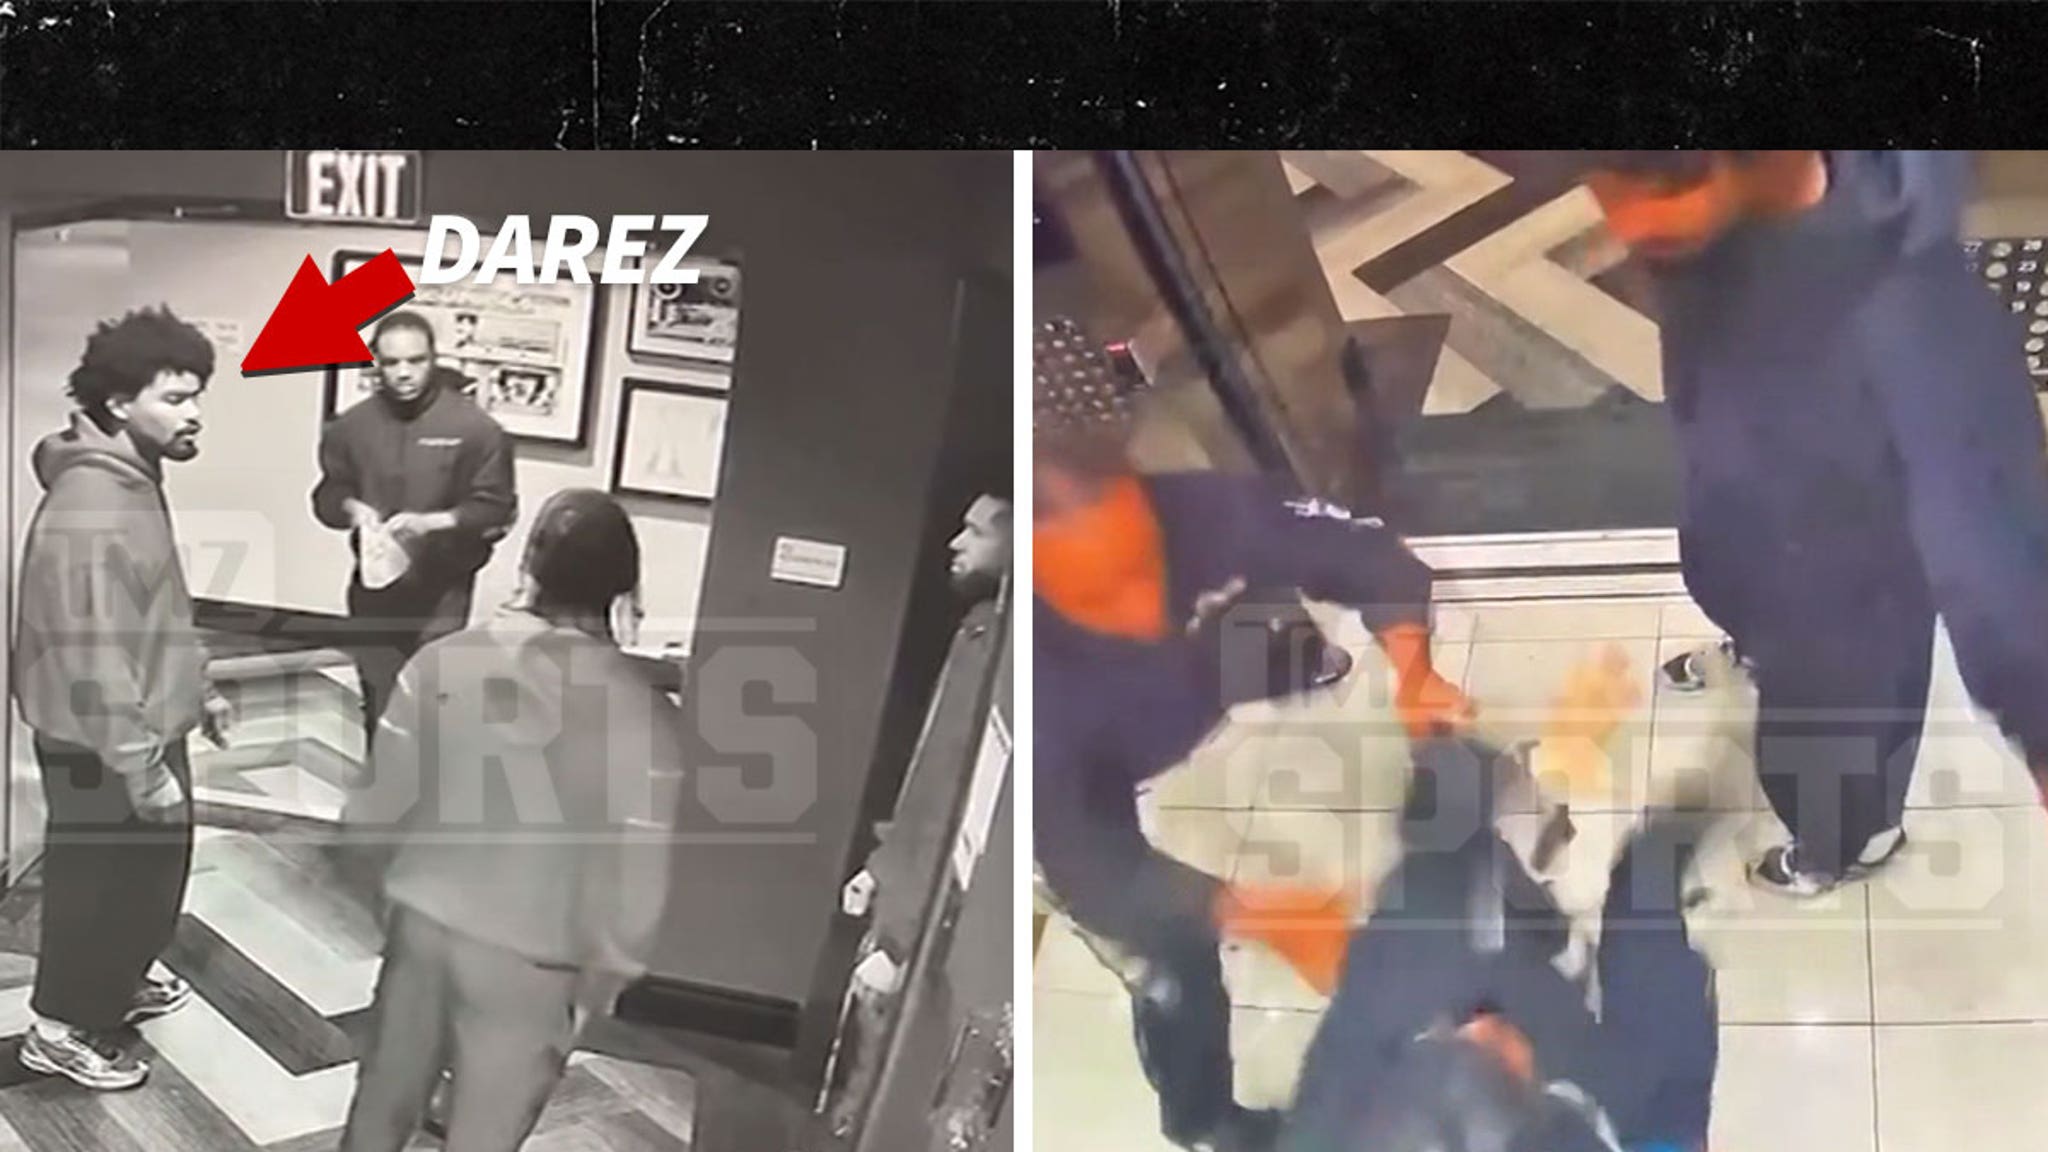 Stephen Diggs’ brother, Derezz, orchestrates attack on man in elevator, video shows